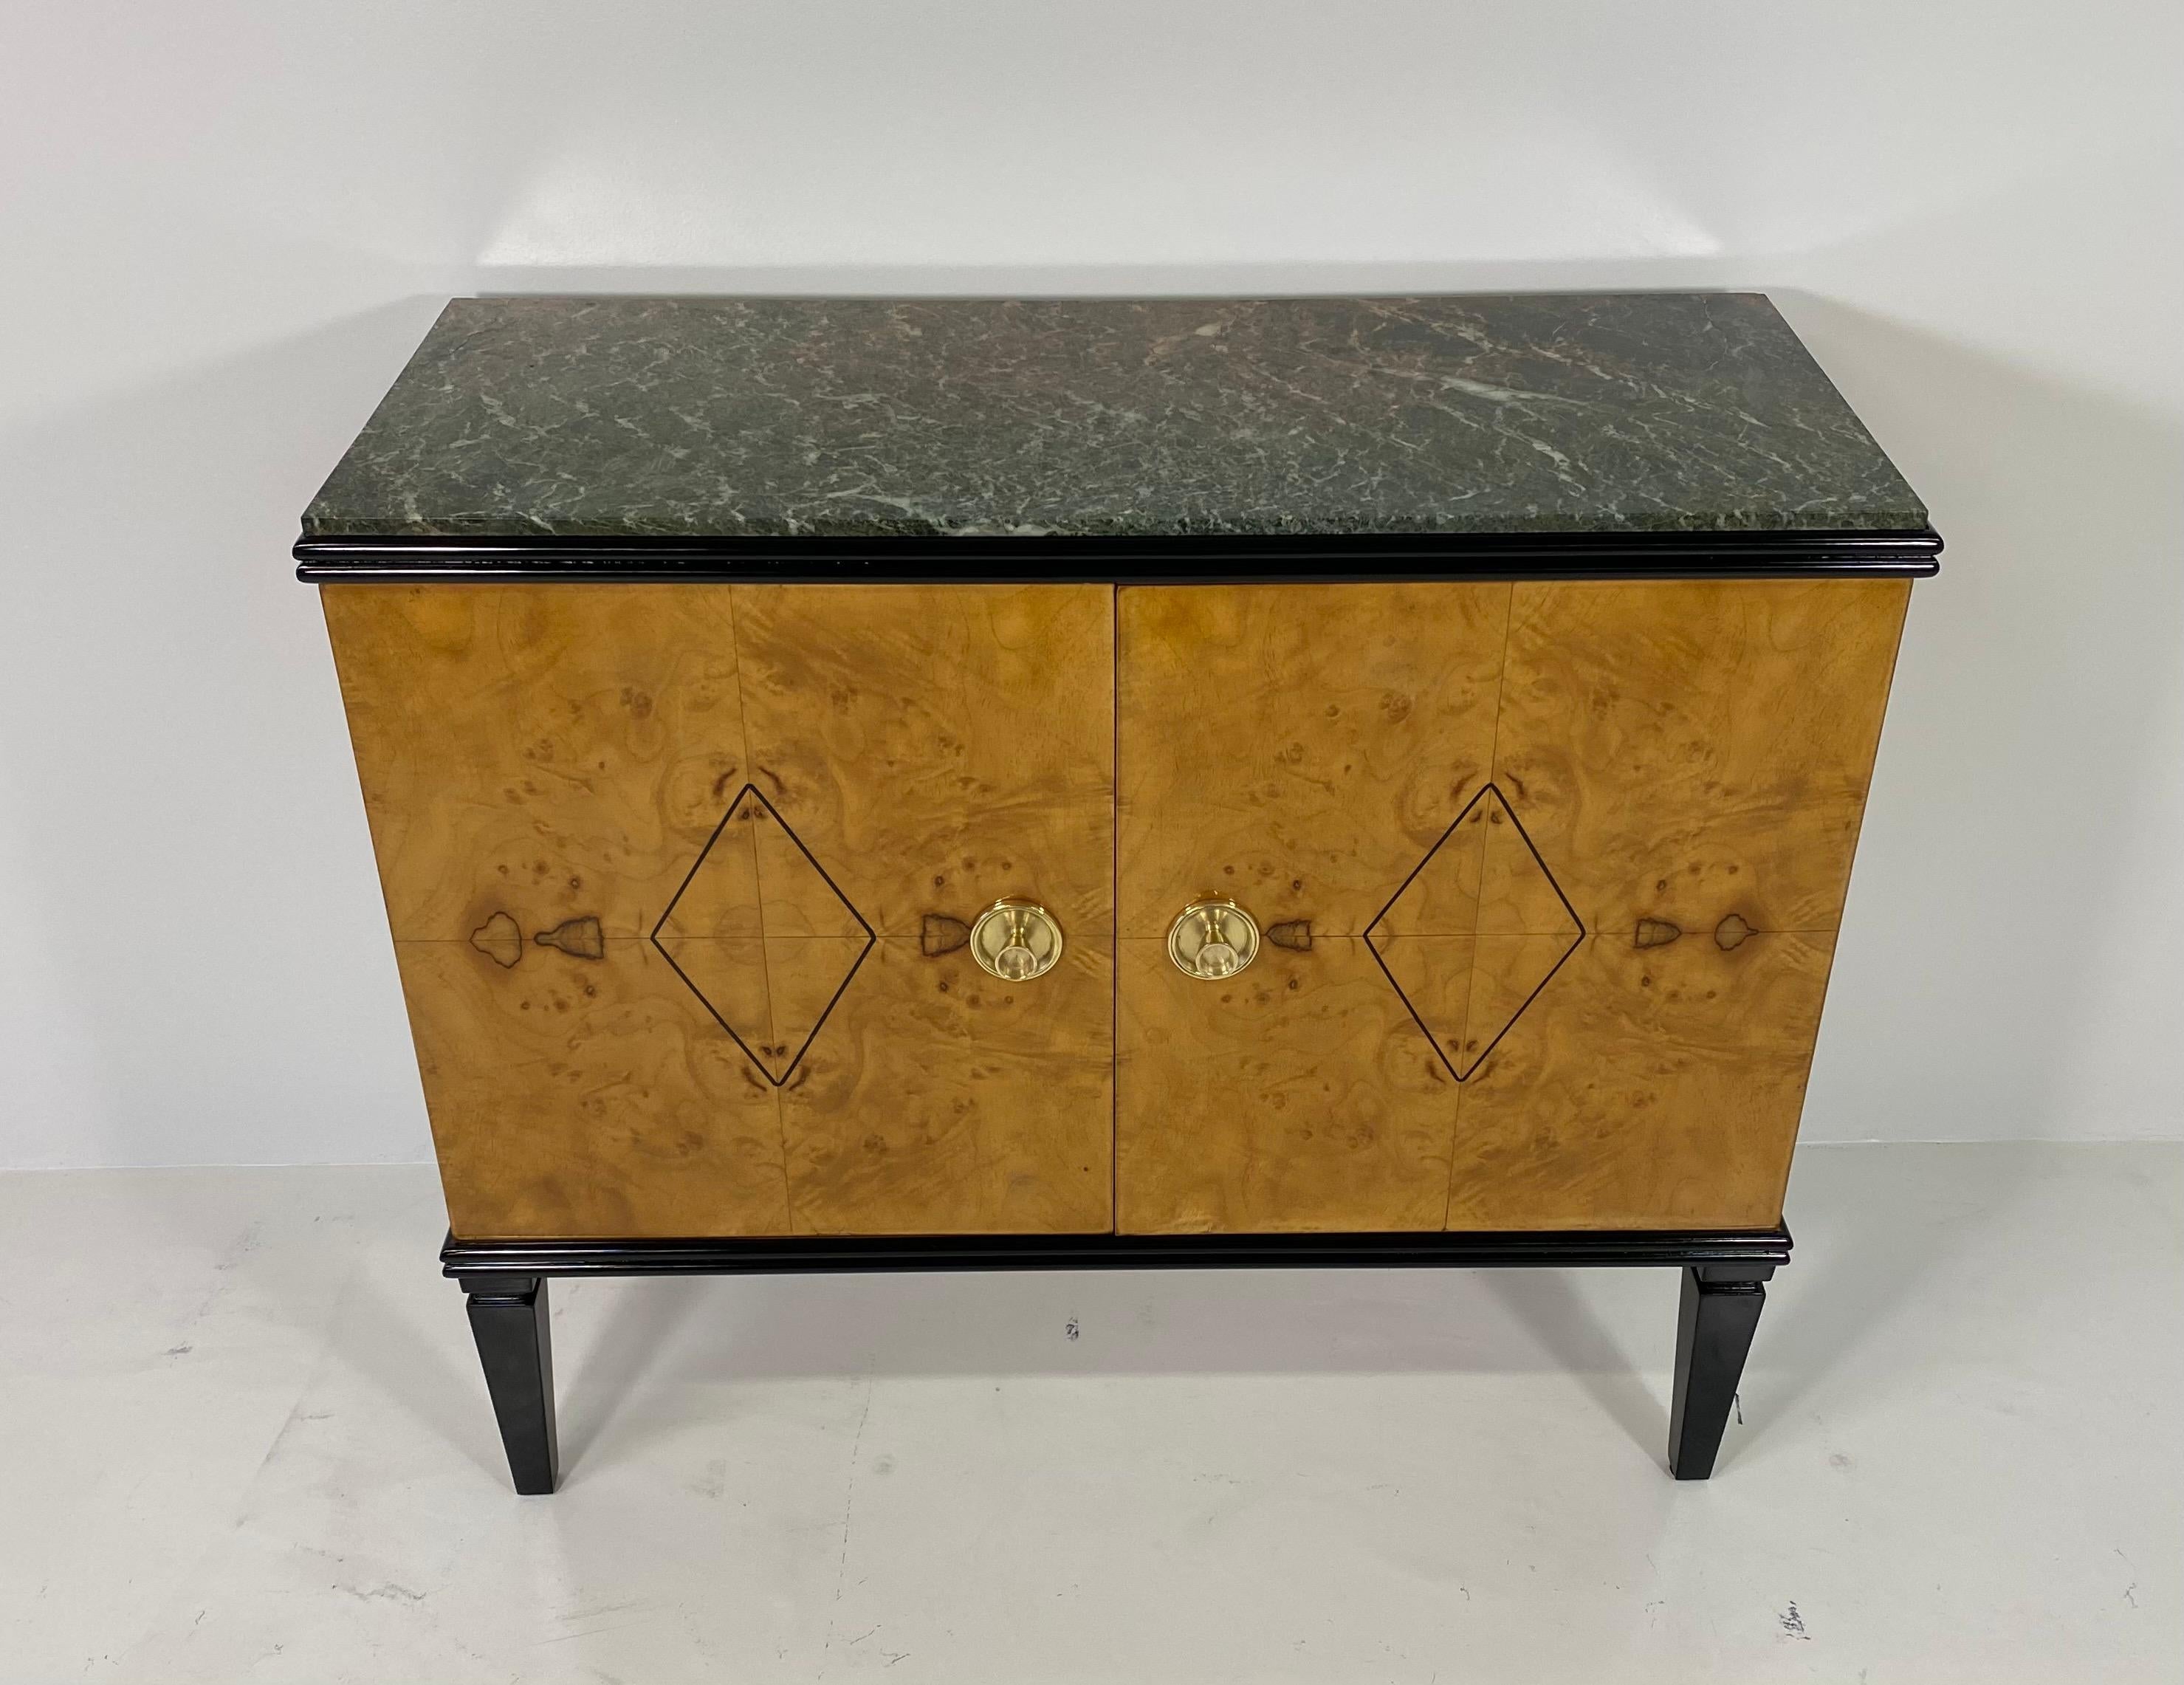 Fine Italian Art Deco cabinet from the 1940s with briar fronts and walnut sides.
The handles are in brass while the profiles are black lacquered.
Top in rare green marble.
Similar cabinet available on our store. (see last photo).